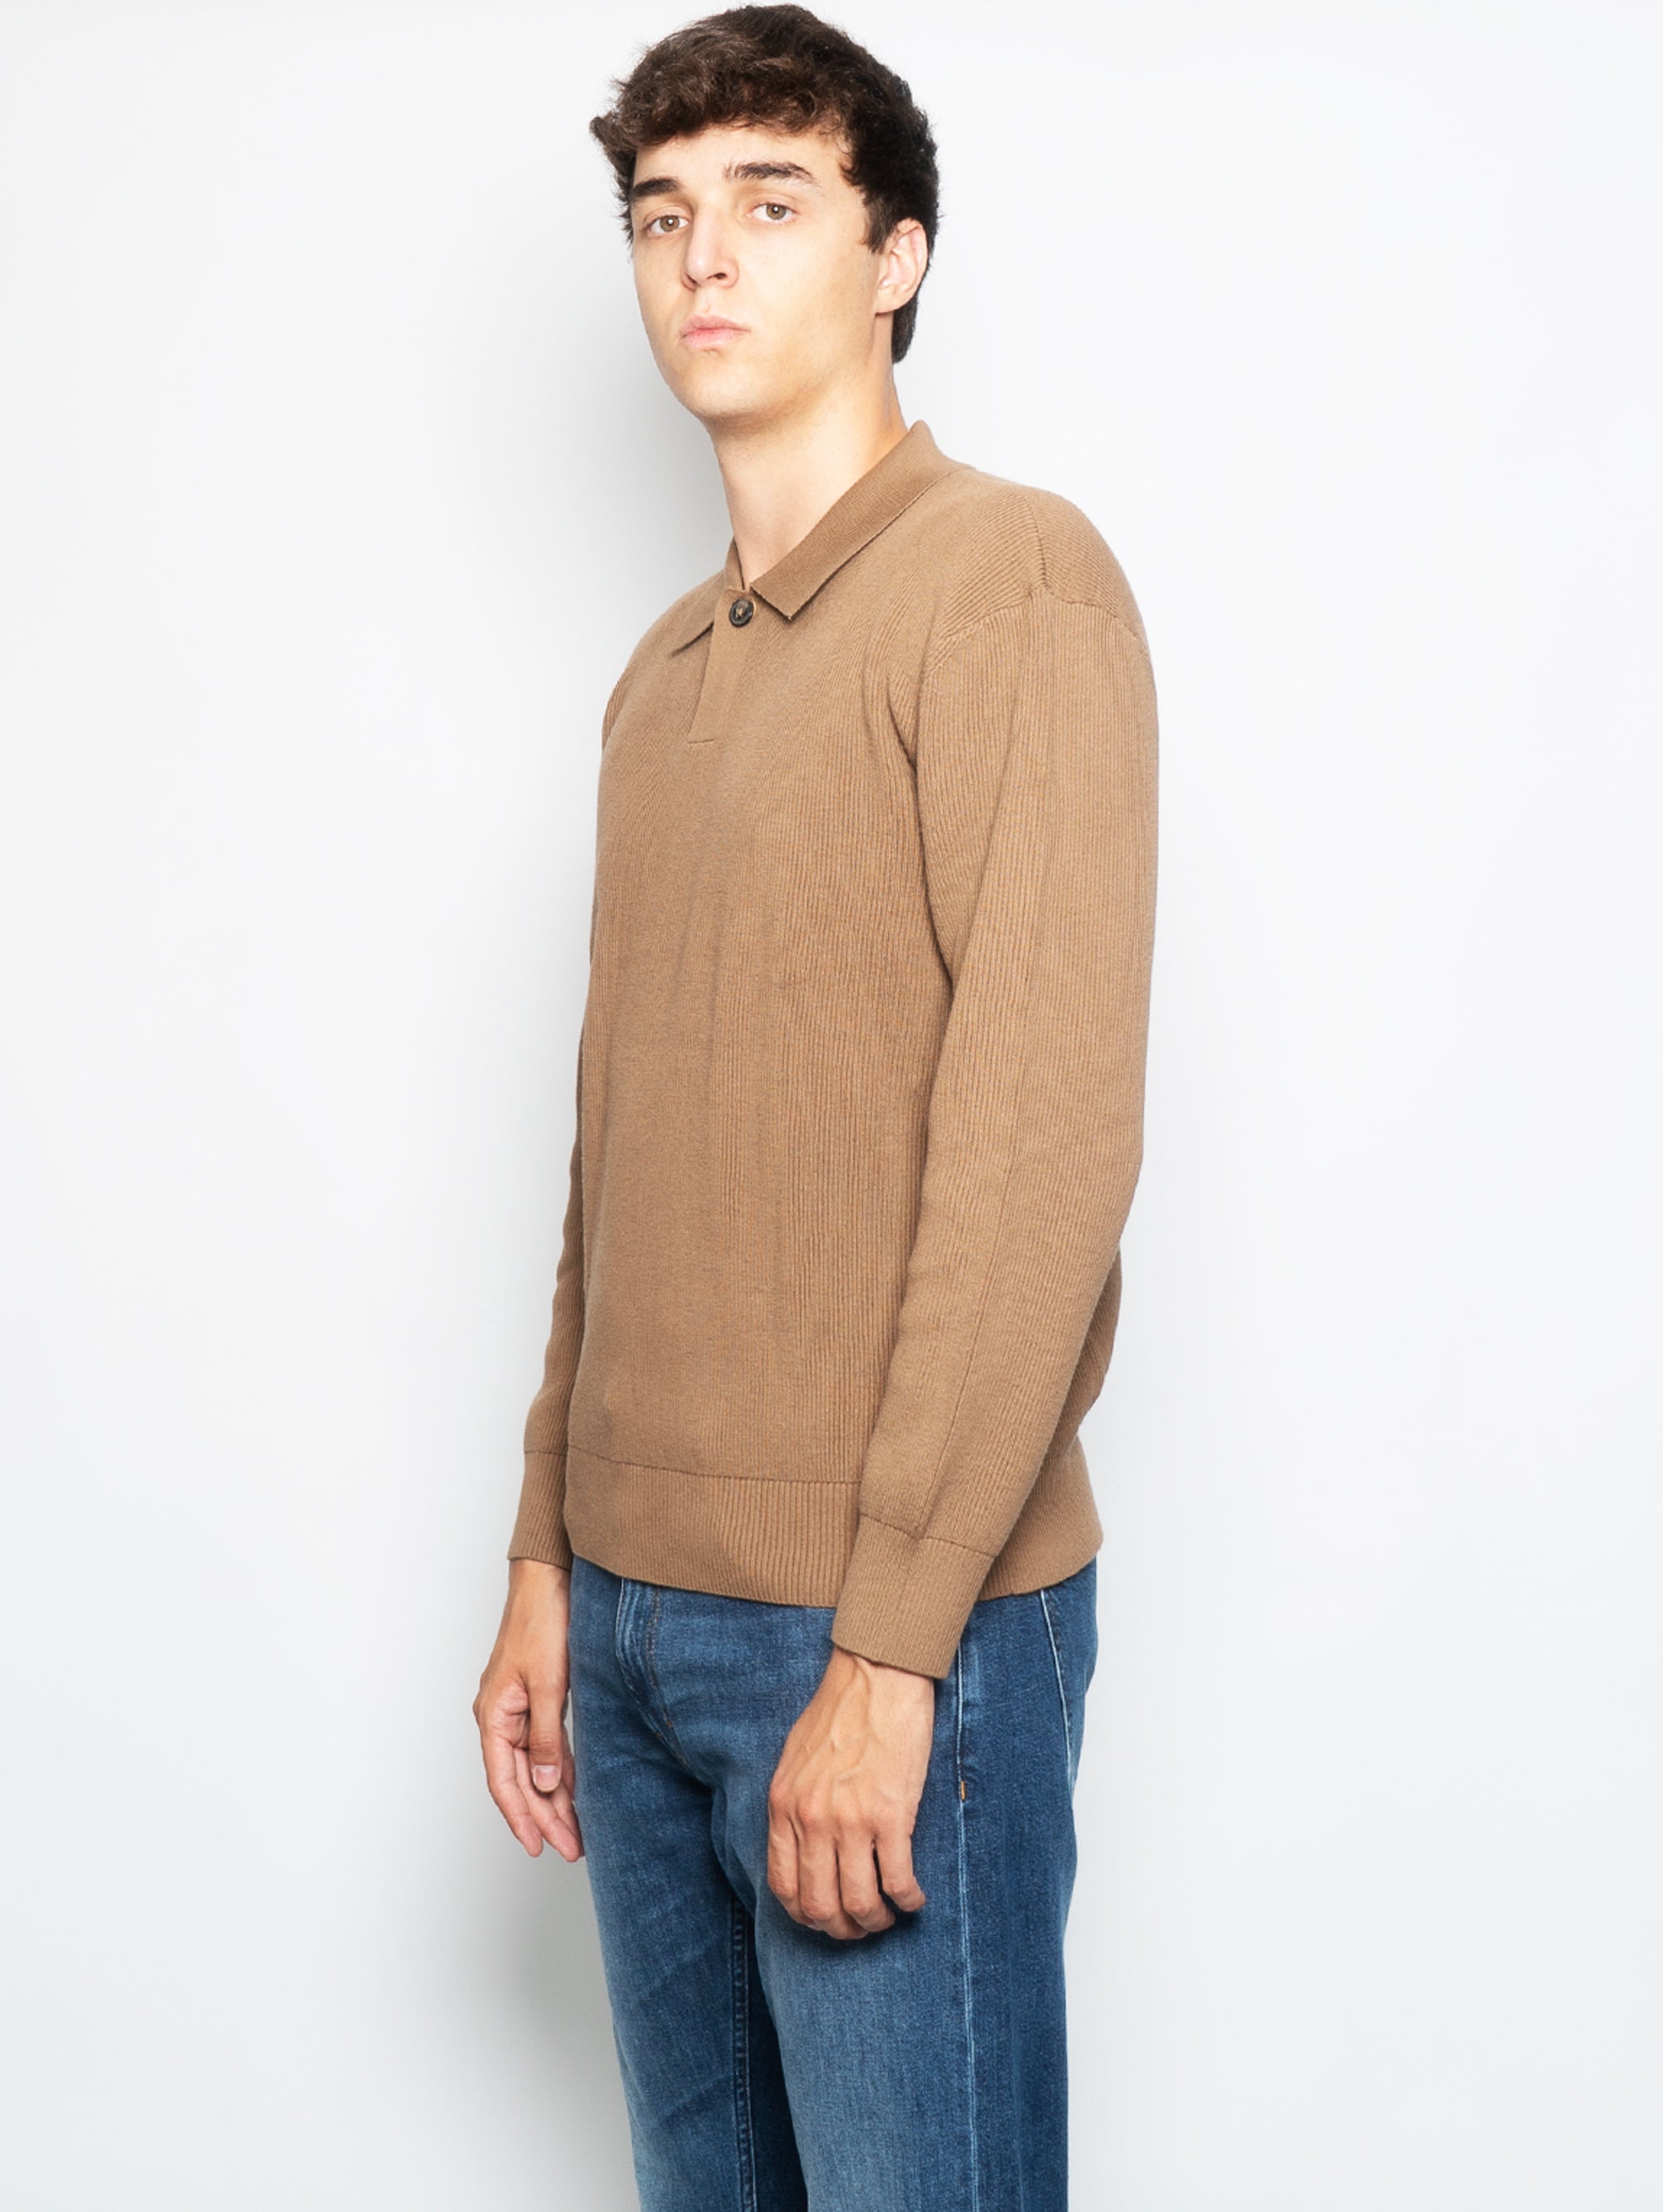 Long Sleeve Polo Shirt in Brown Ribbed Knit